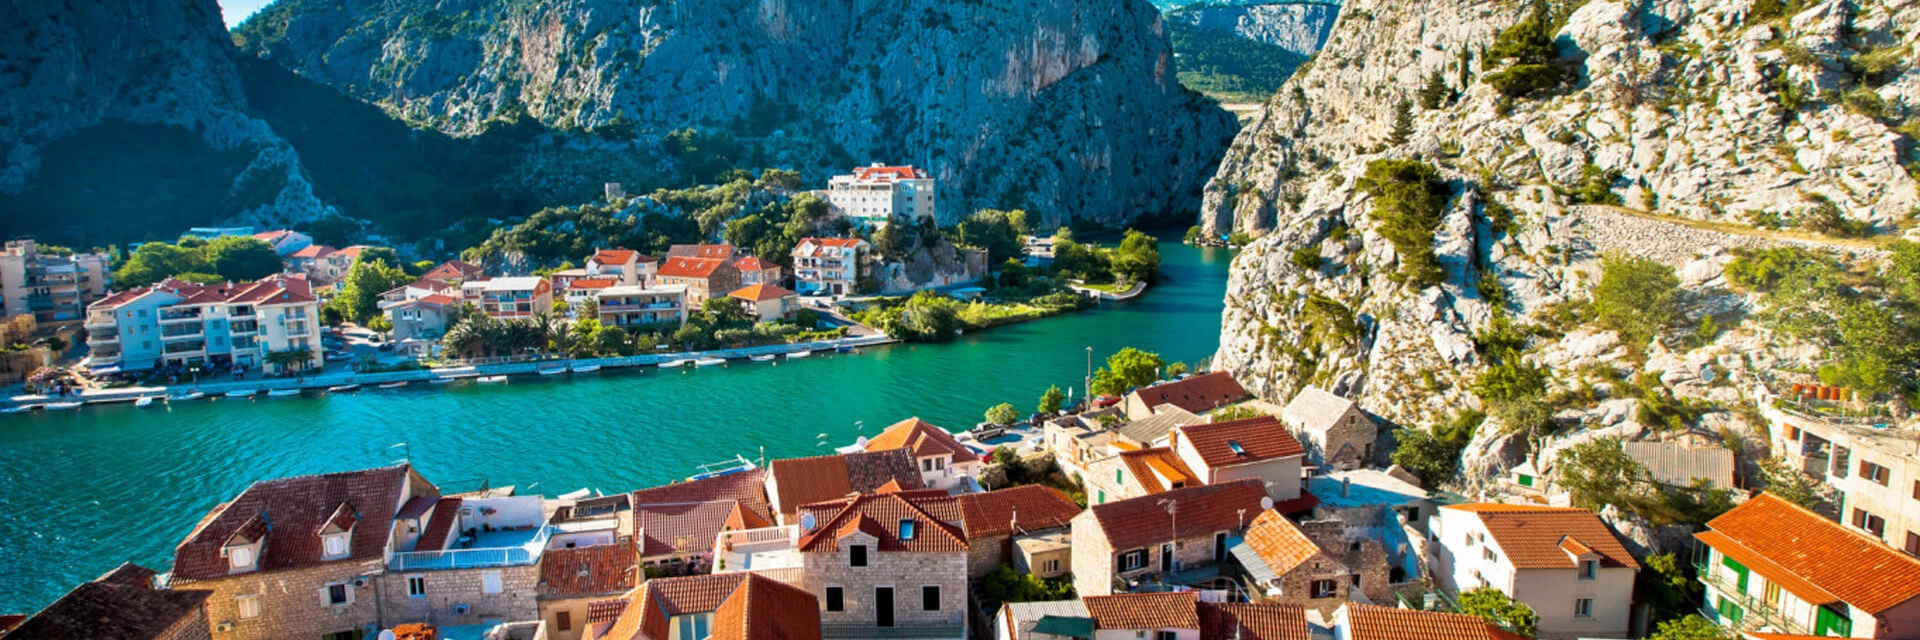 Omiš – a day in a pirate hideout